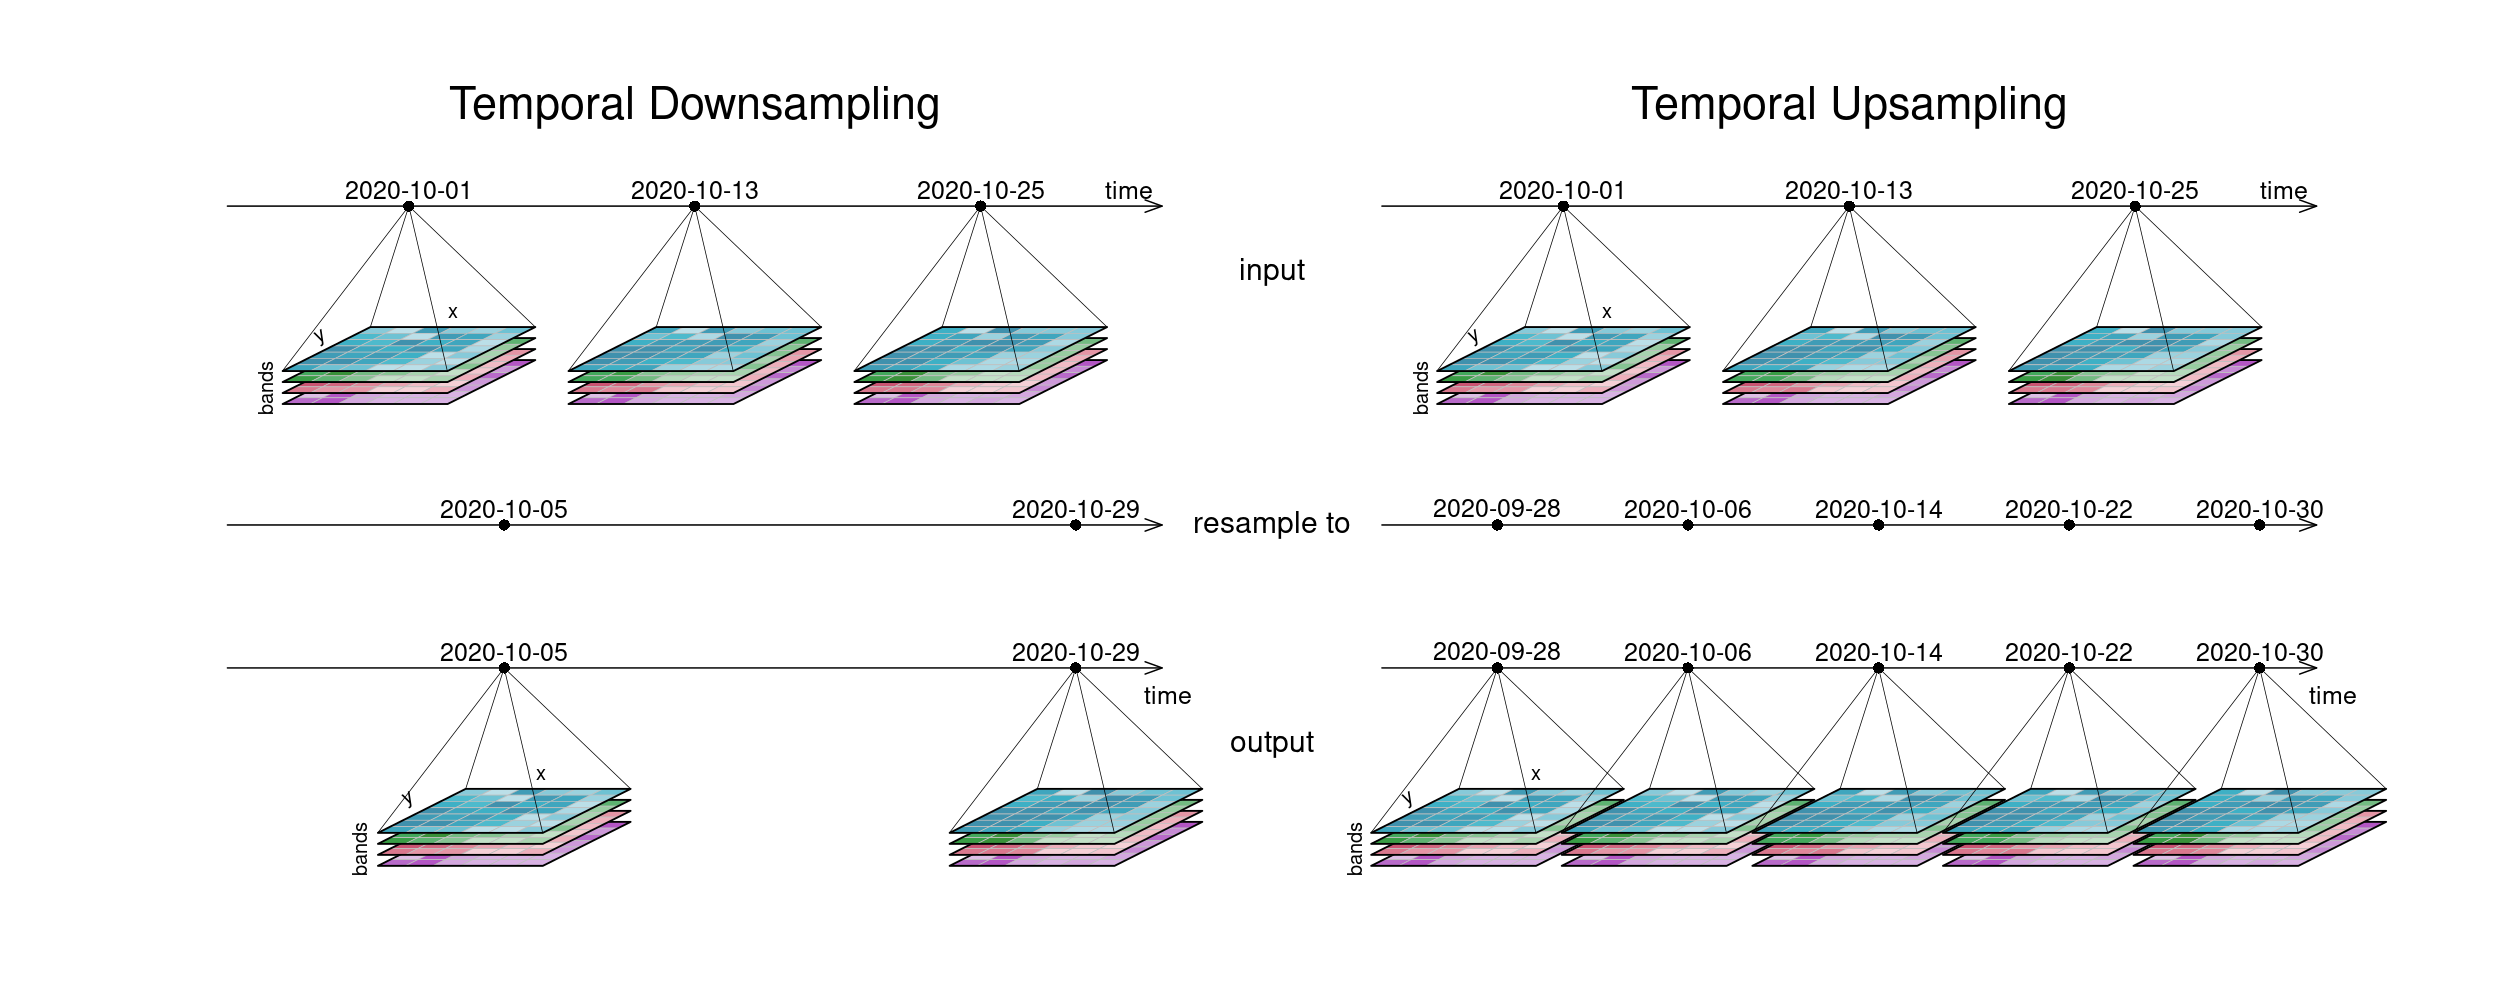 Datacube temporal resampling (up and down): Downsampling: To a timeline-representation of the example tiles, another timeline with only 2 steps at different dates is applied. The result has tiles only at those new timesteps. In Upsampling, the existing 3 timesteps are sampled into 5 result timesteps.